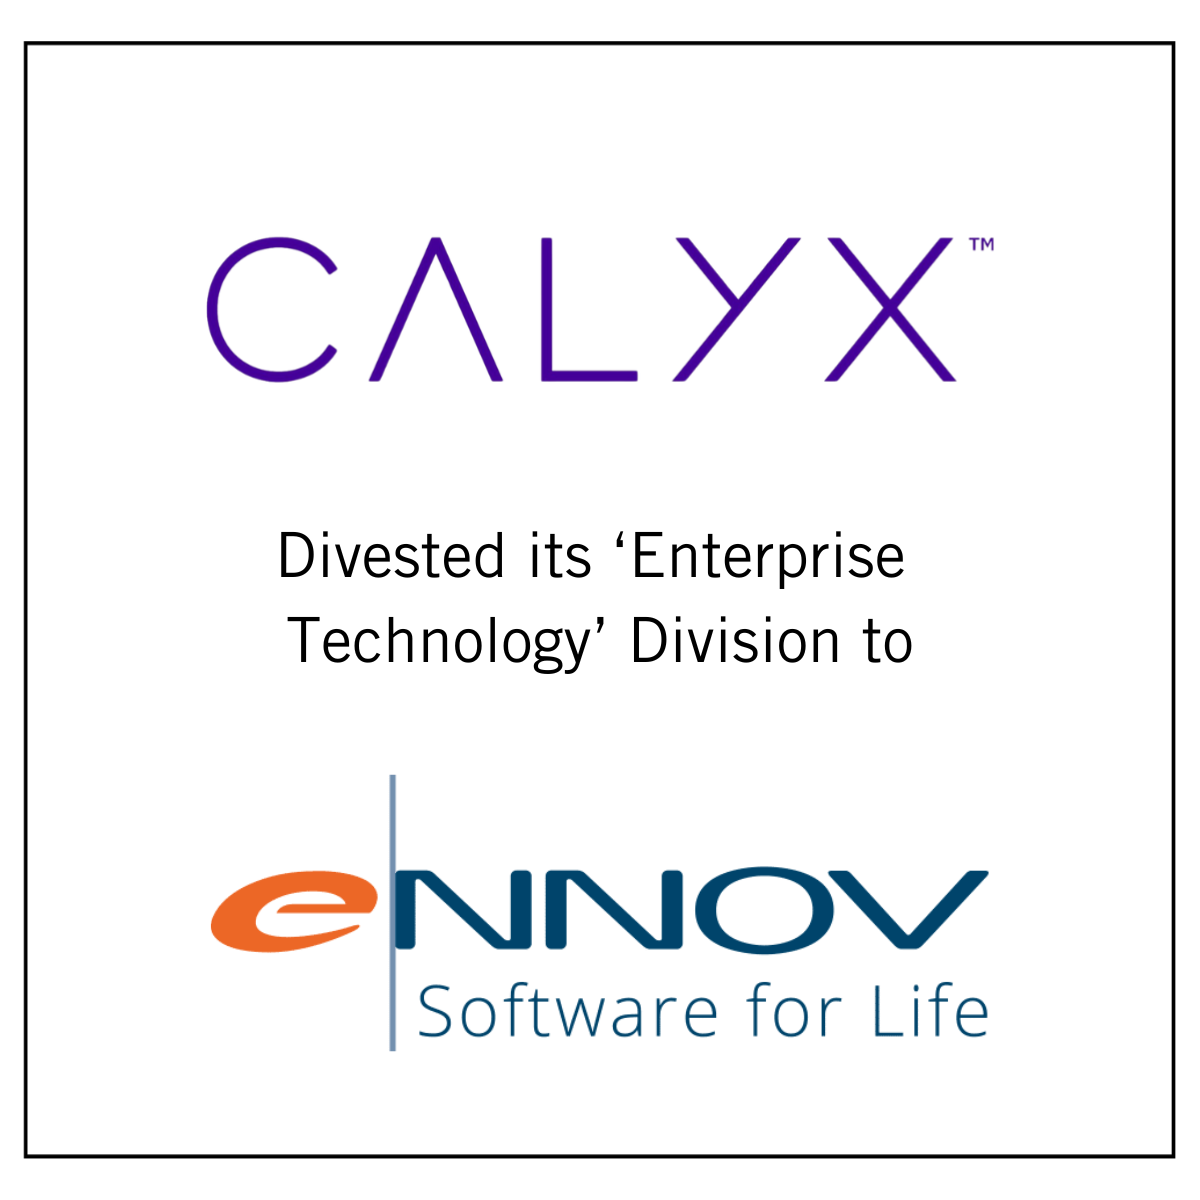 Calyx has divested its 'Enterprise Technology' Division to Ennov, to Enhance Ennov’s portfolio of eClinical and eRegulatory Software Solutions